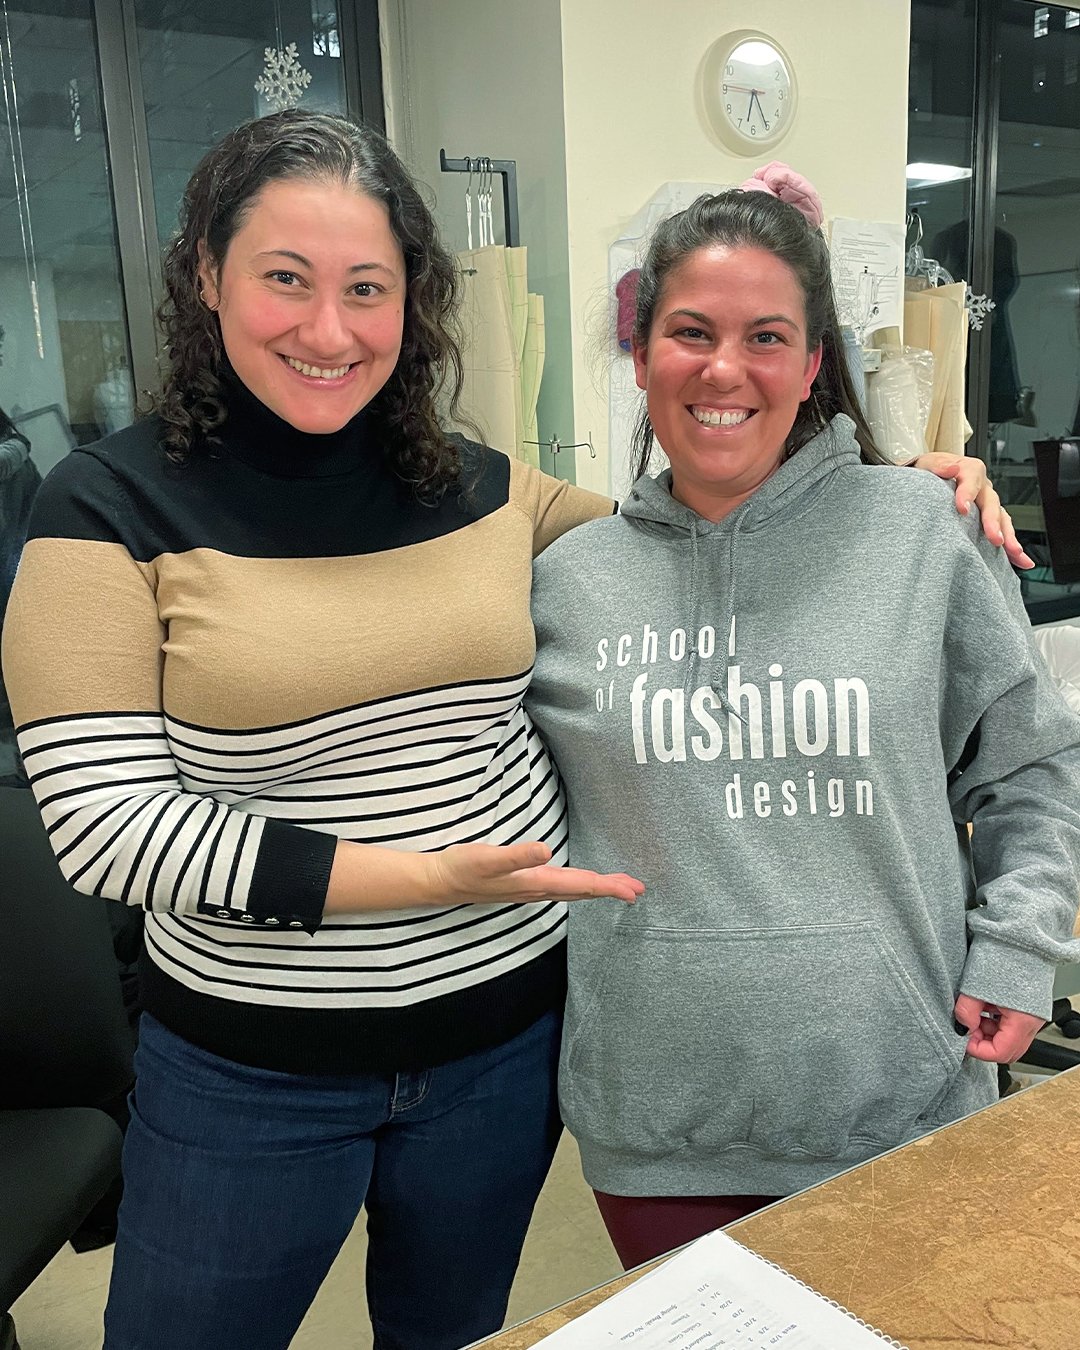 We love when our students and alumni embrace our school&rsquo;s spirit! Shop our school  store for original SFD merch! Links in bio! 👕👚👗
.
.
.
.
#SFDpride #fashiondesign #bostonfashion #fashionstudent #fashioneducation